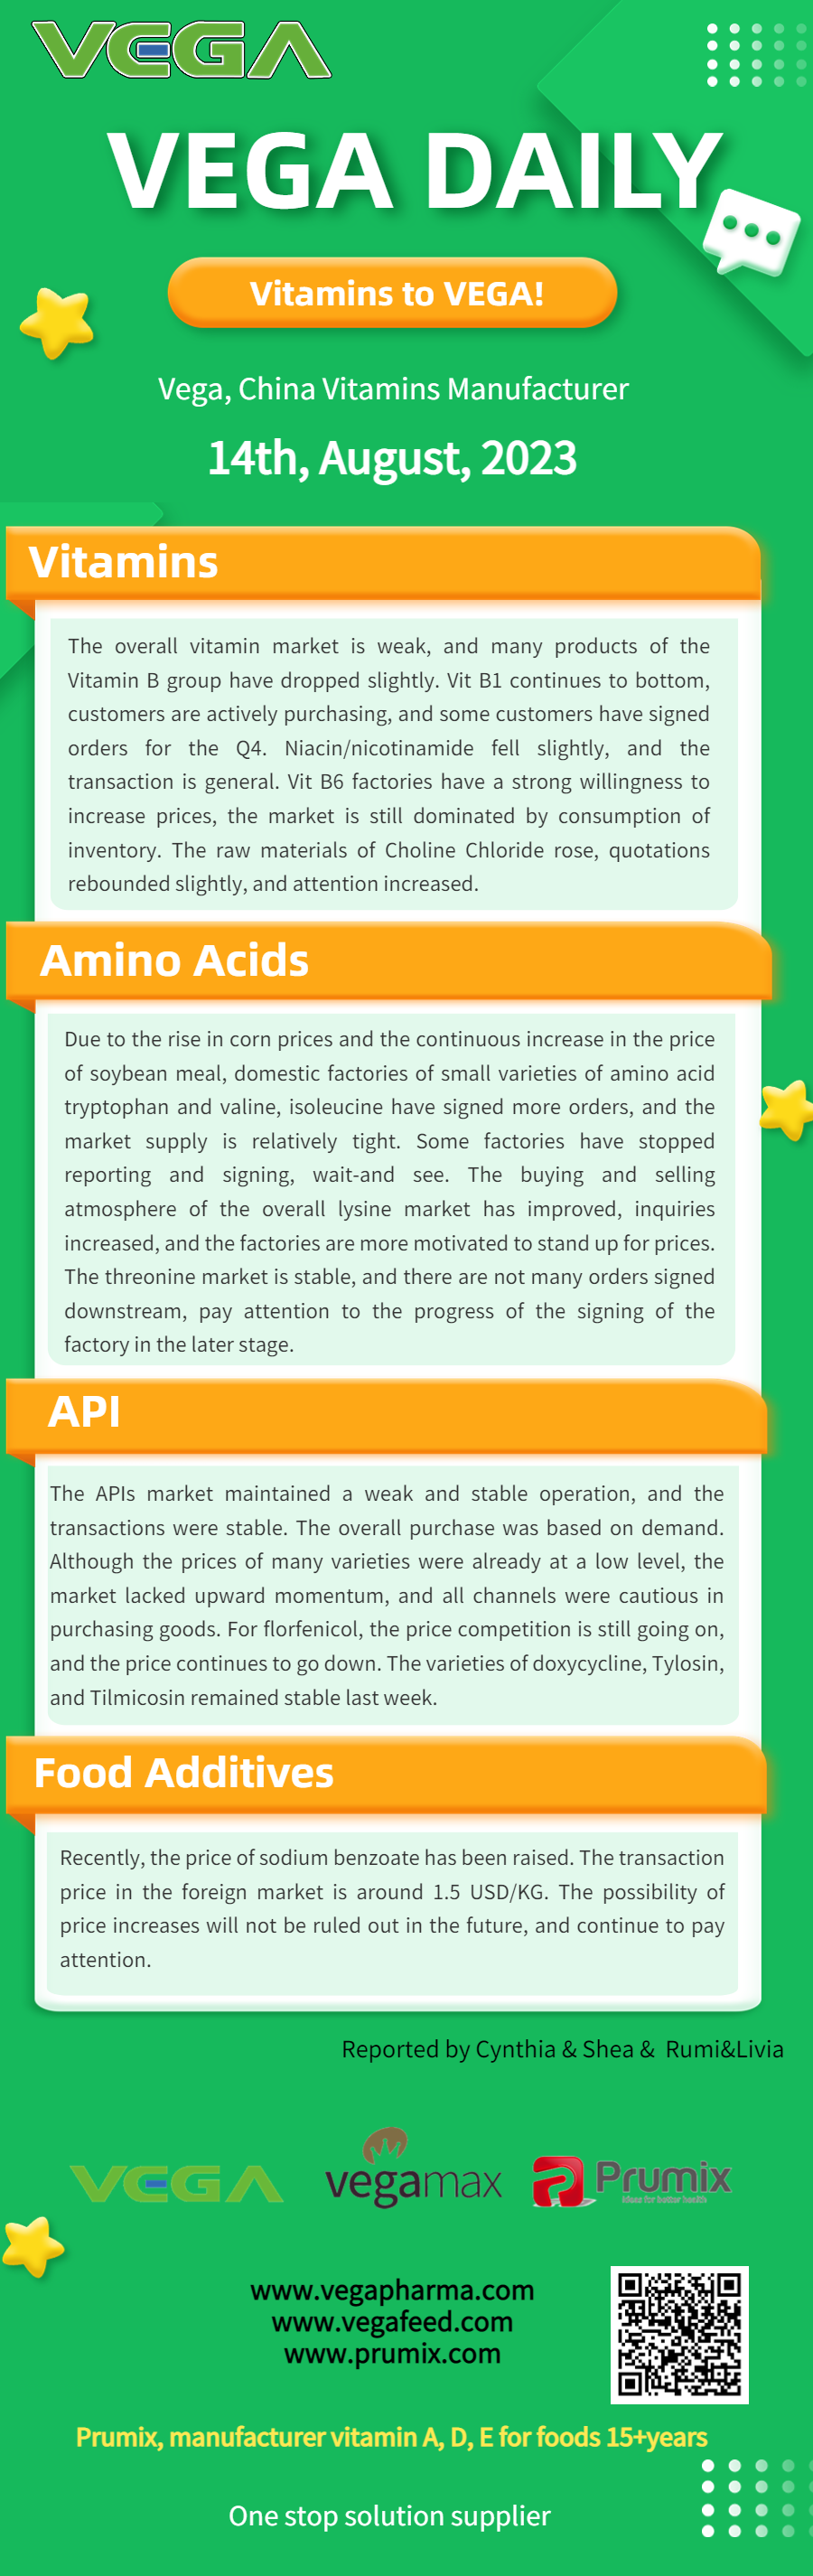 Vega Daily Dated on August  14th 2023 Vitamin Amino Acid API Food Additives.png